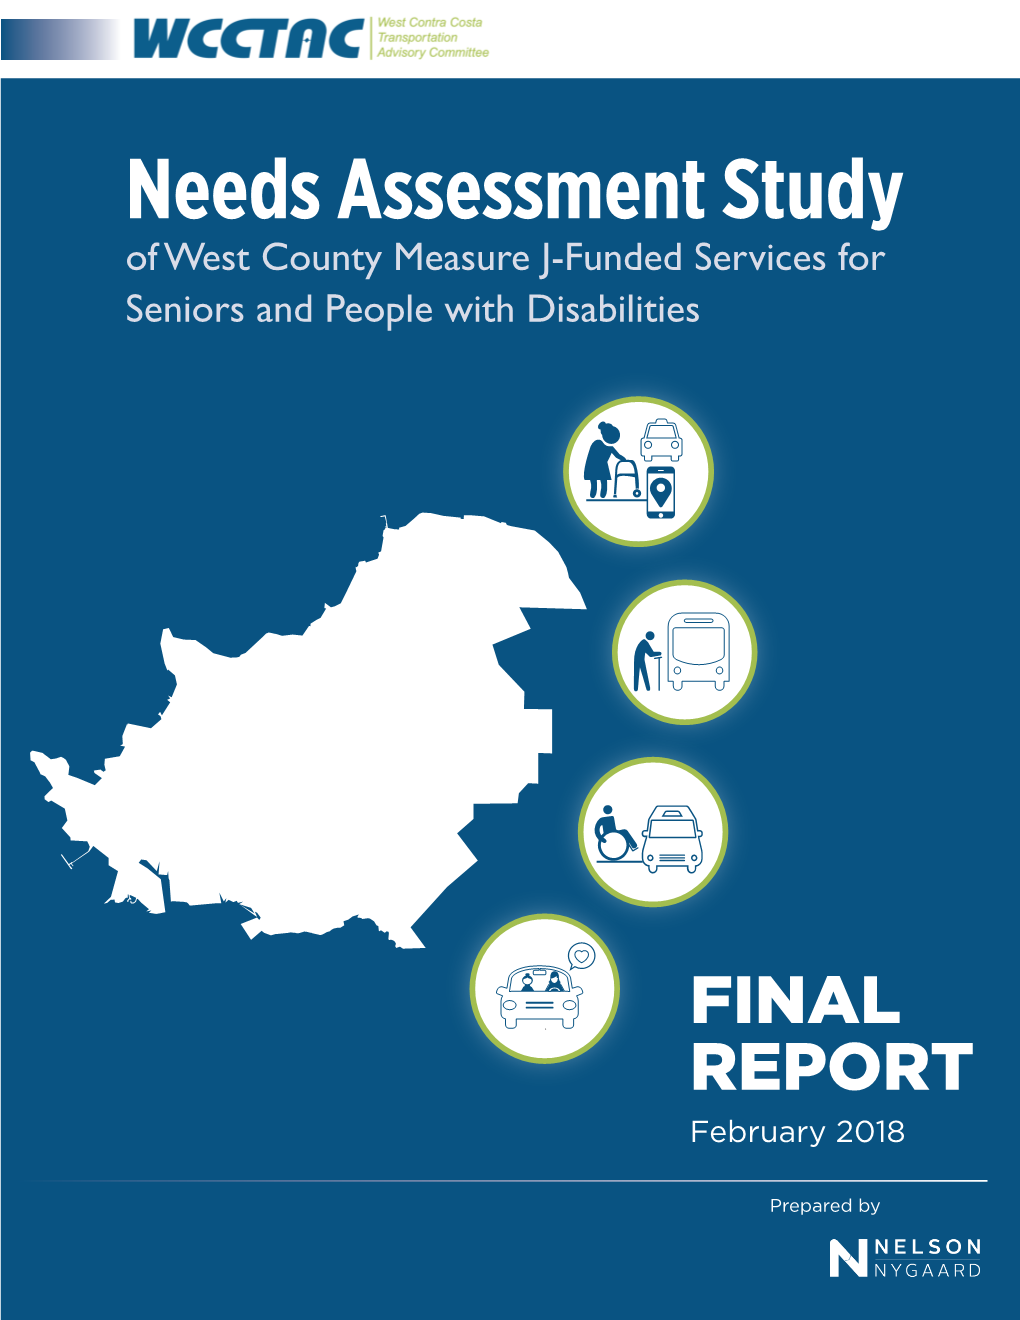 Needs Assessment Study of West County Measure J-Funded Services for Seniors and People with Disabilities